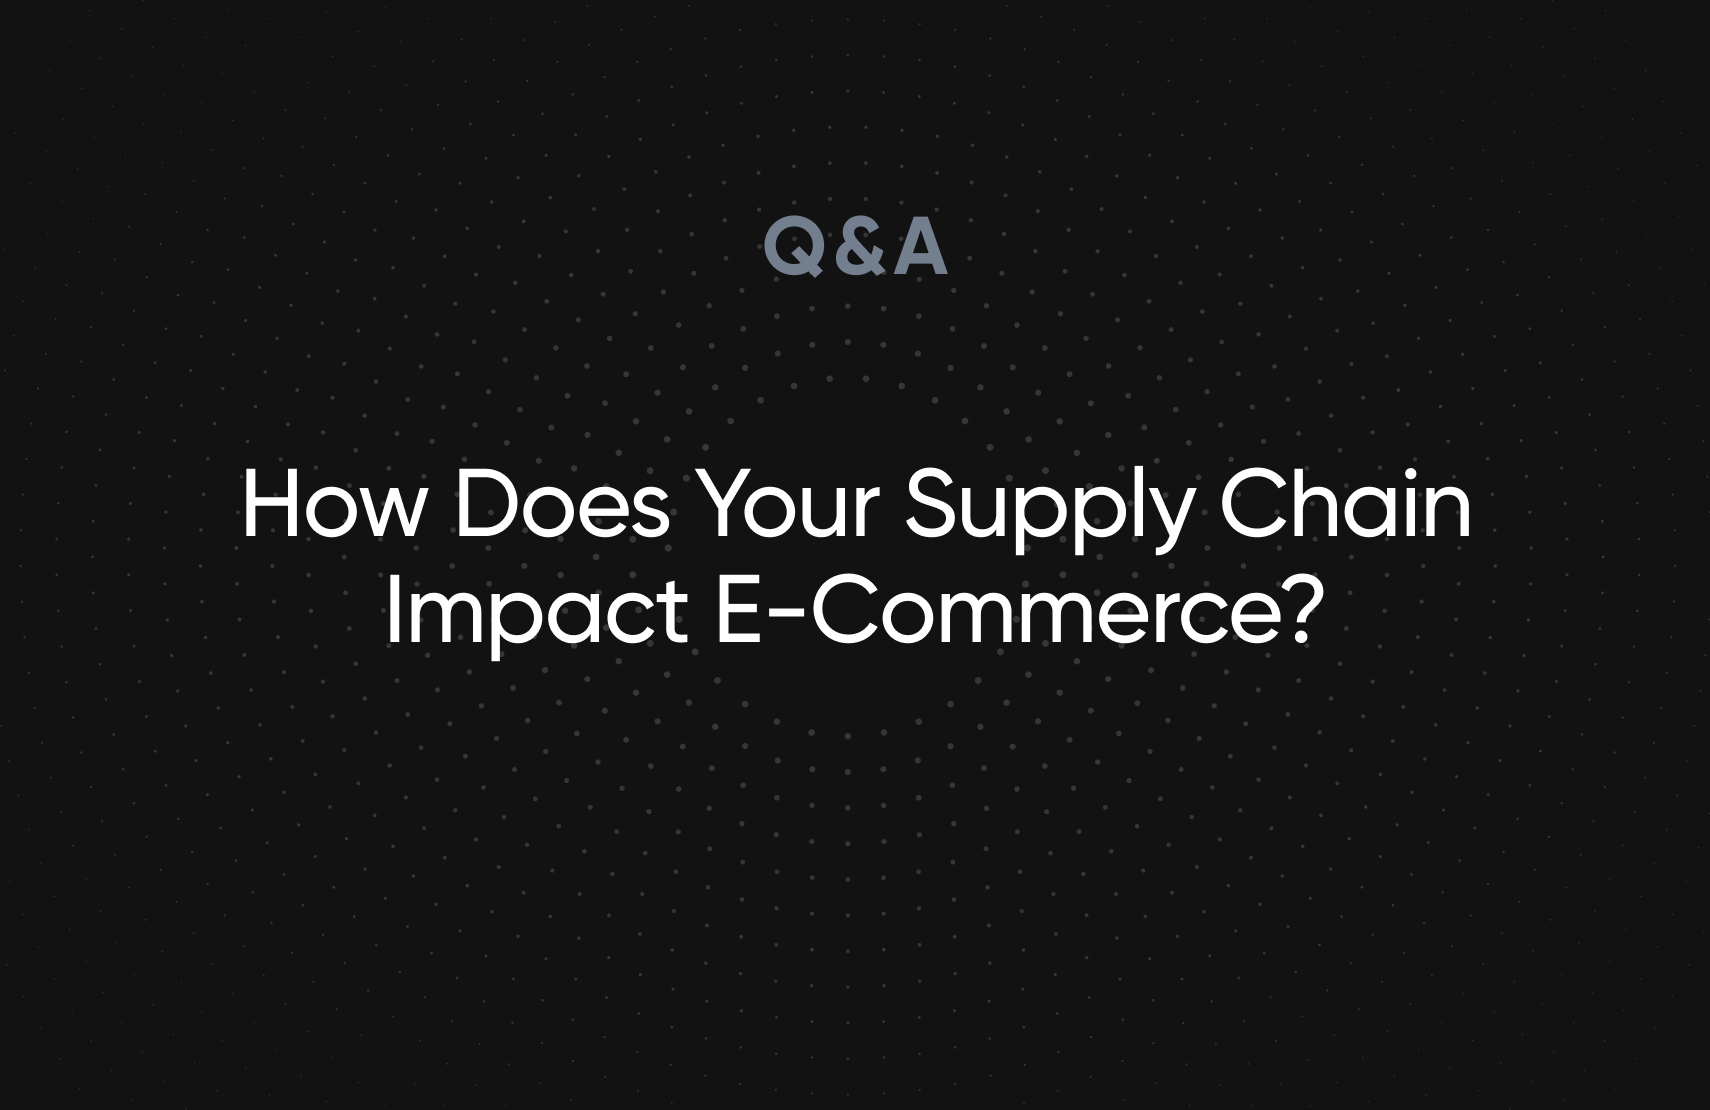 How Does Your Supply Chain Impact E-Commerce?